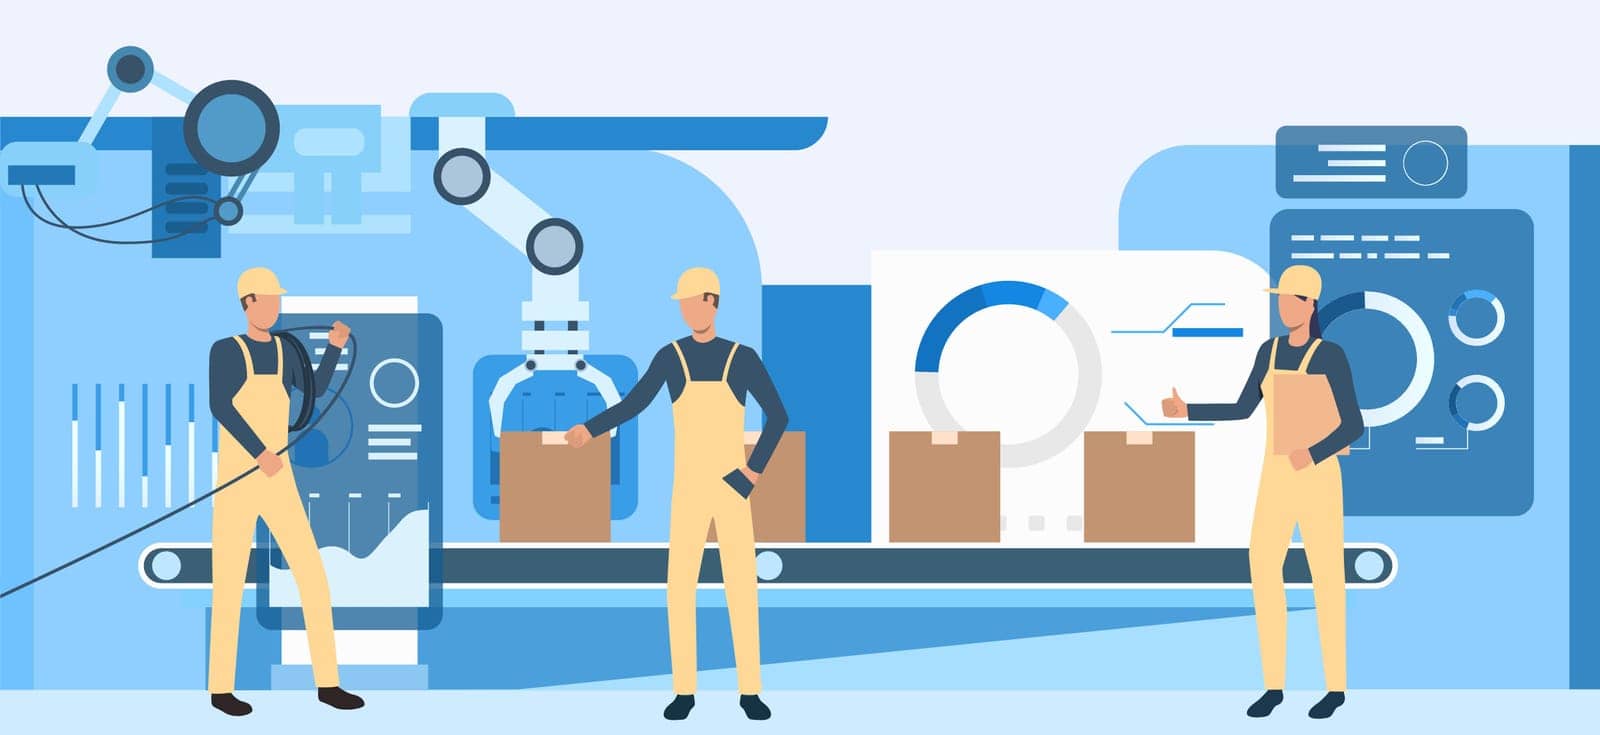 People working at factory illustration. Operational workers, conveyor belt, assembly line. Industry concept. Vector illustration for topics like production, machine, blue color